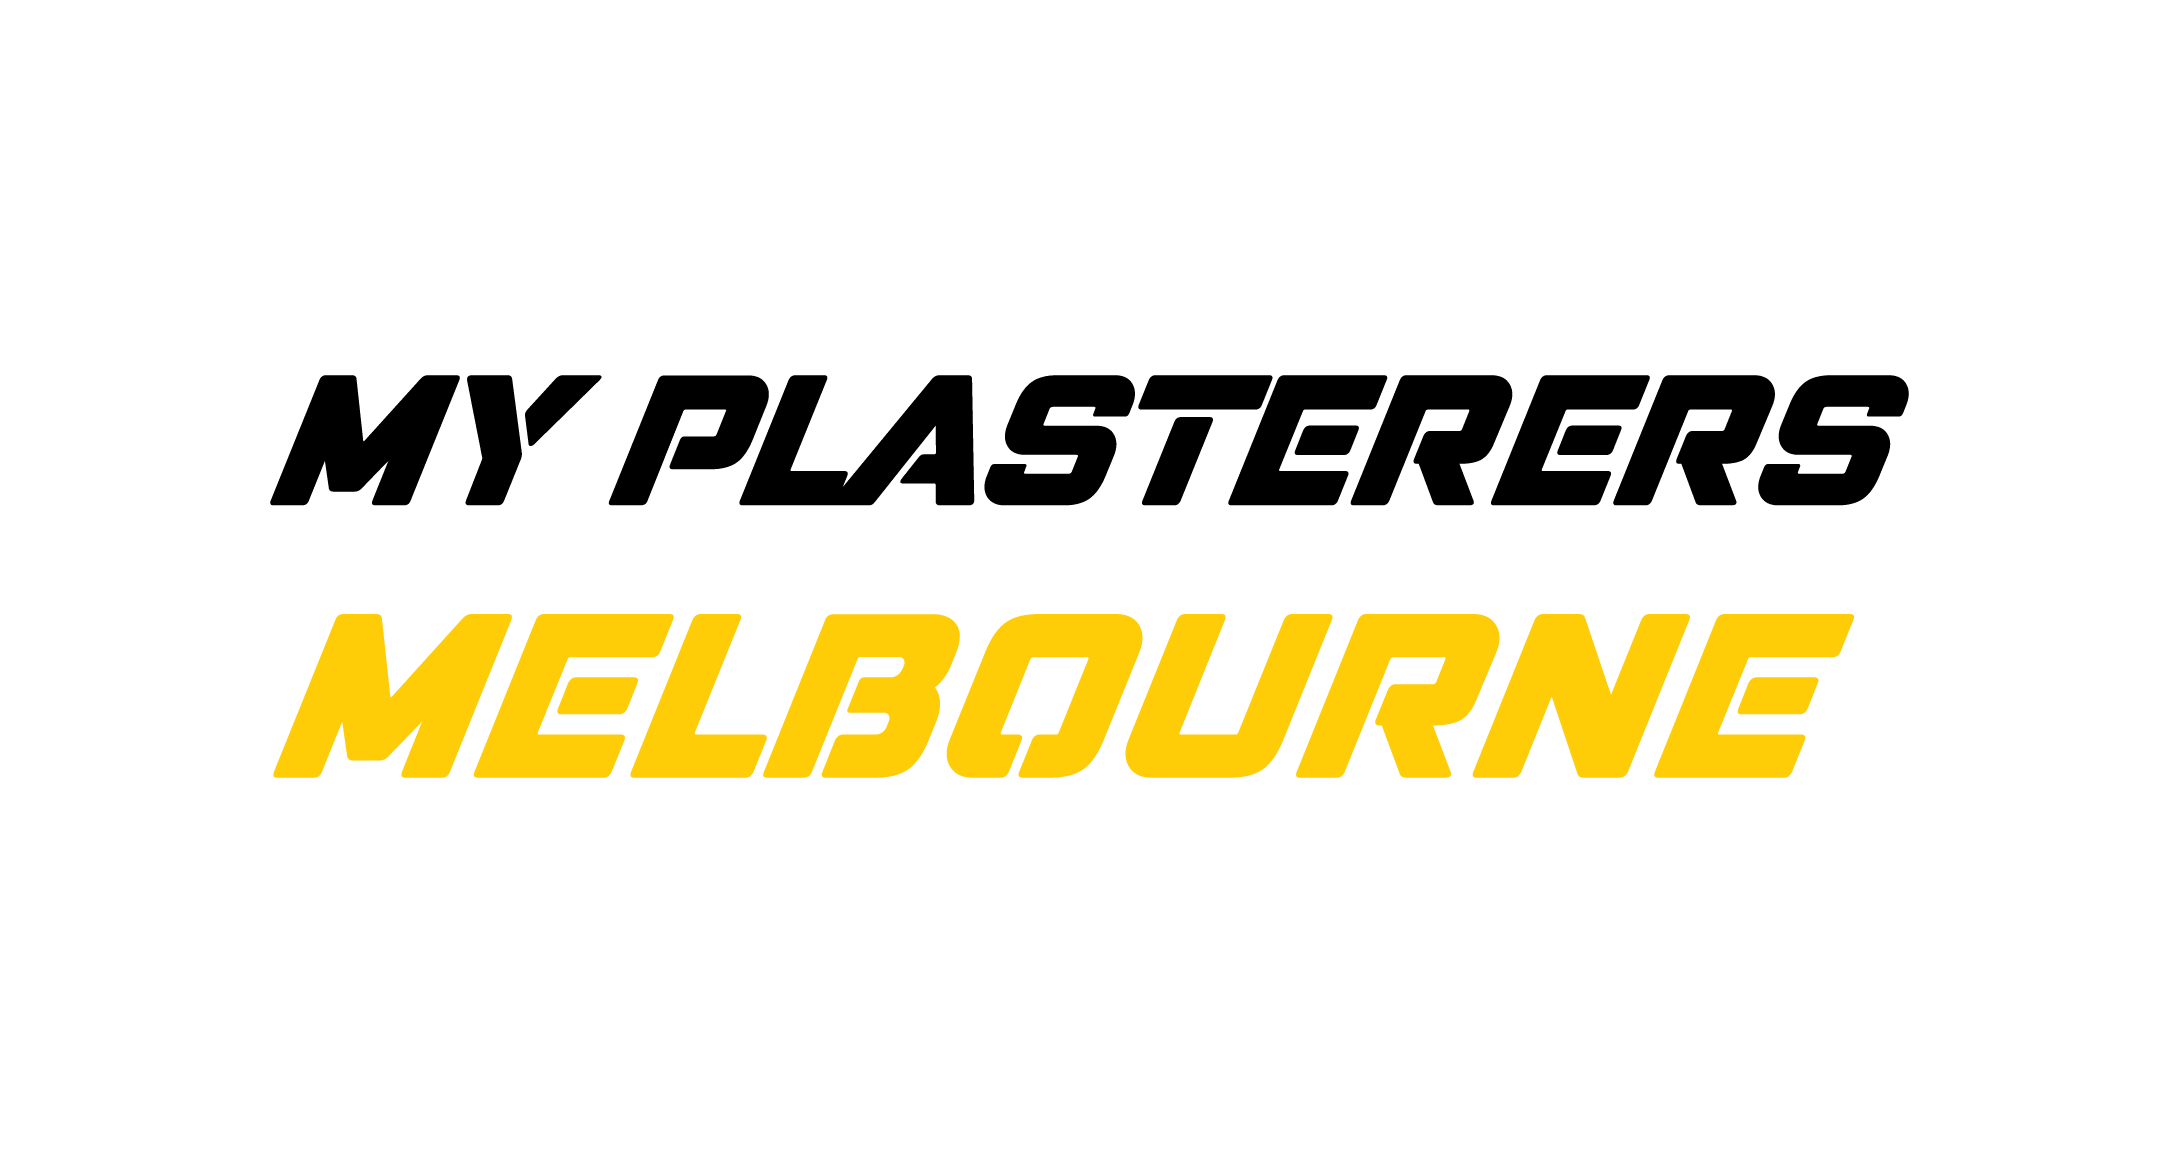 My Plasterers Melbourne